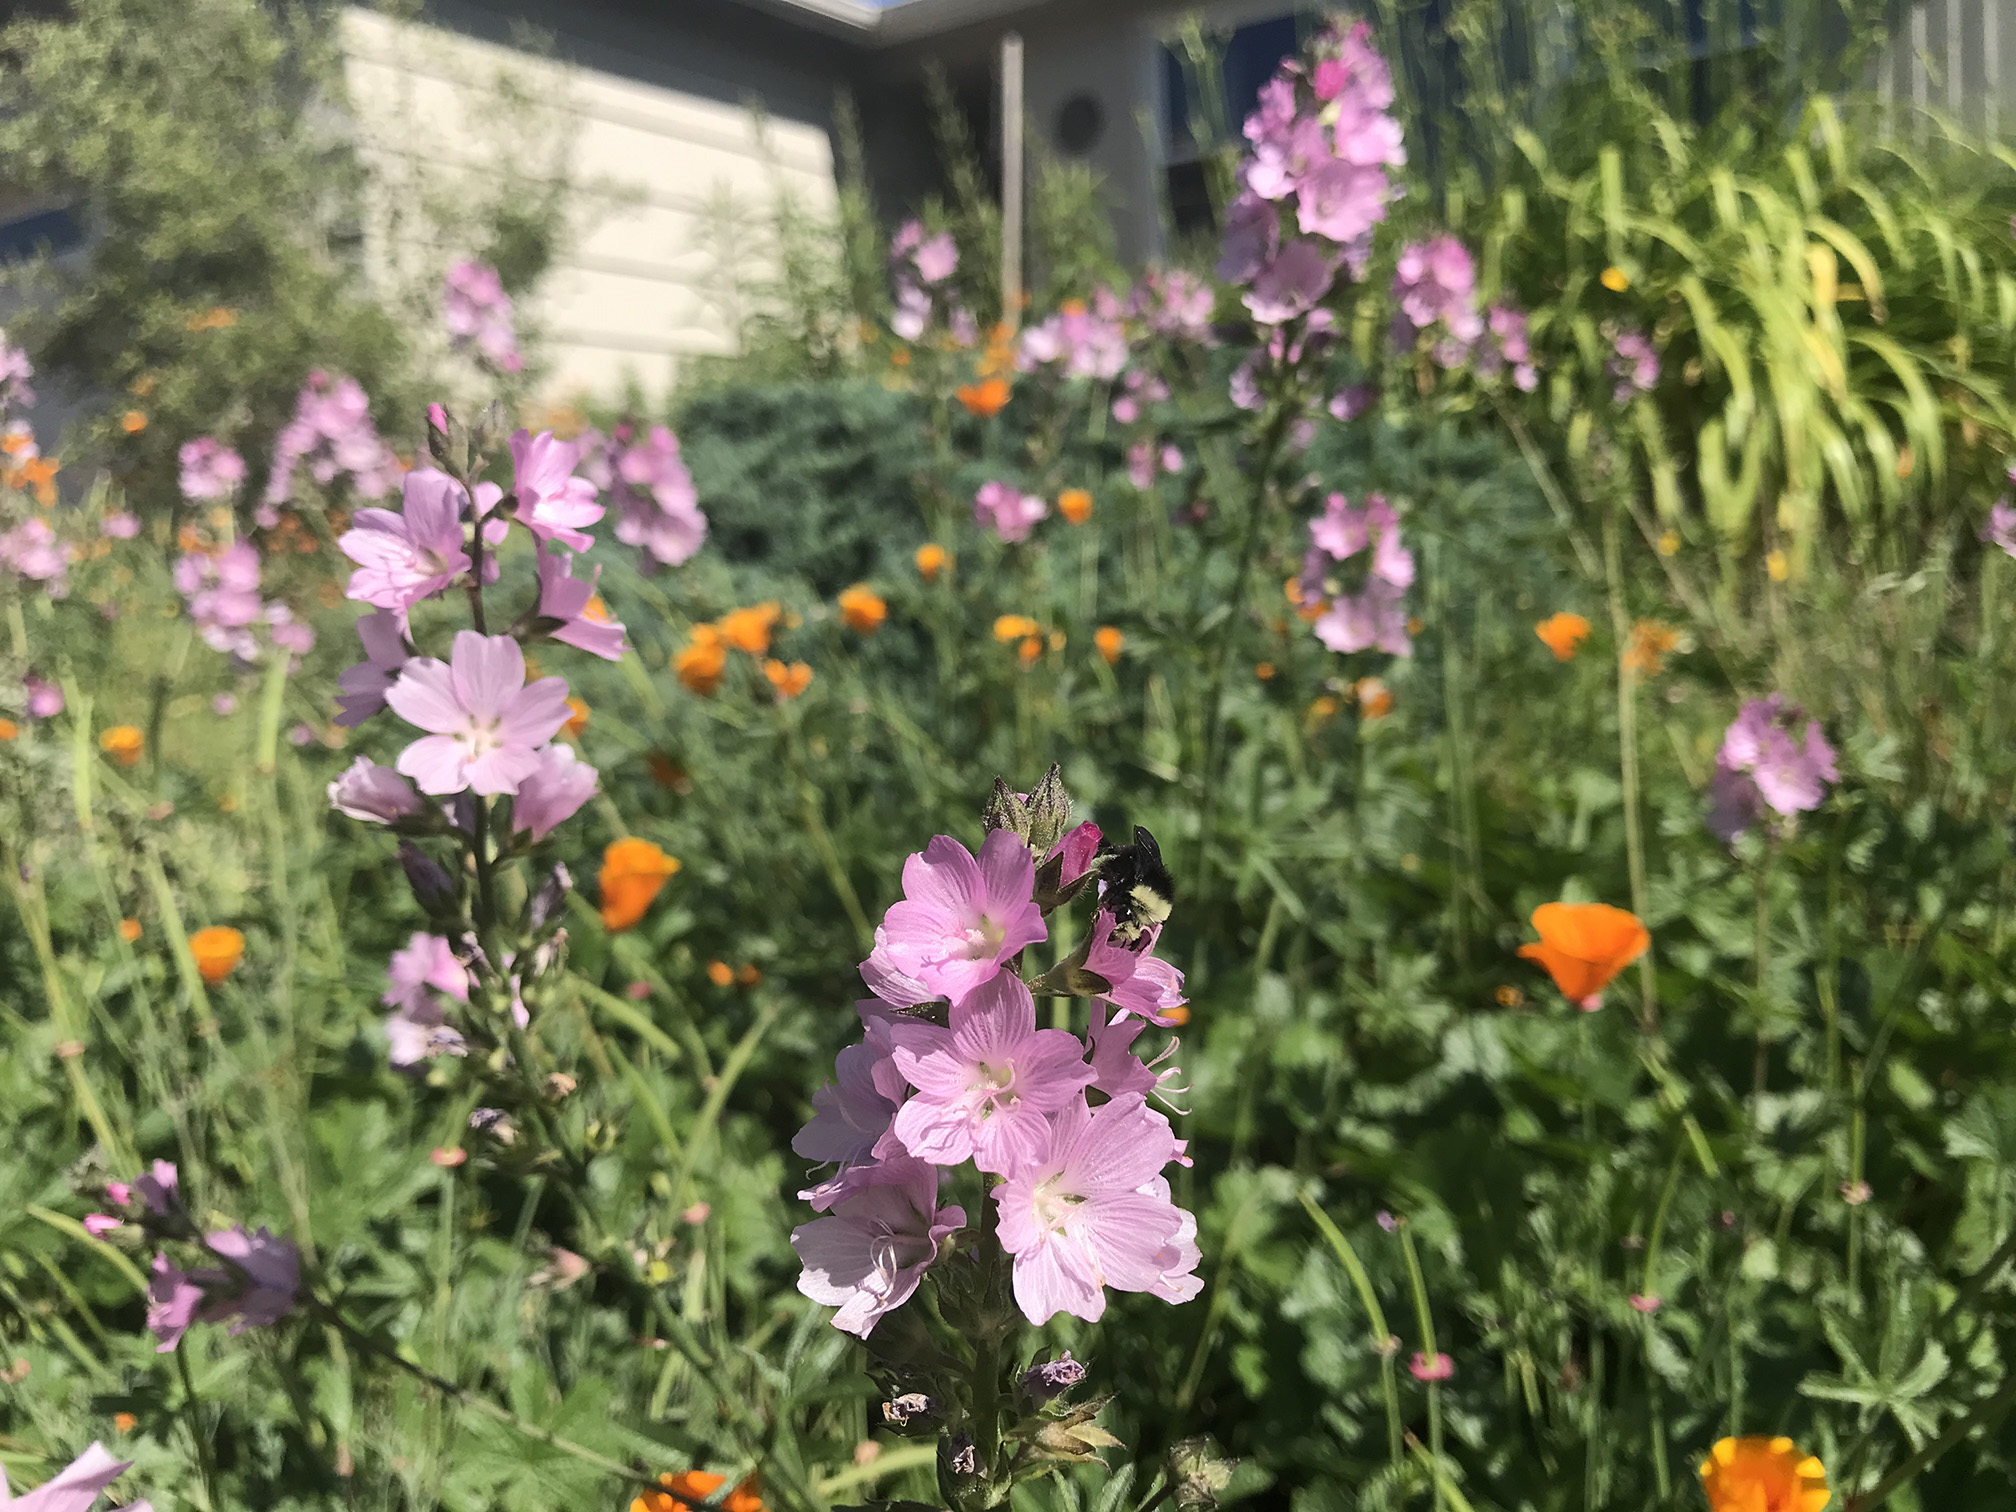 several tall spikes of pink checkermallow flowers stand among a scattering of golden-orange flowers of California poppy in this garden. In the foreground, a bumble bee with a yellow head forages on a checkermallow